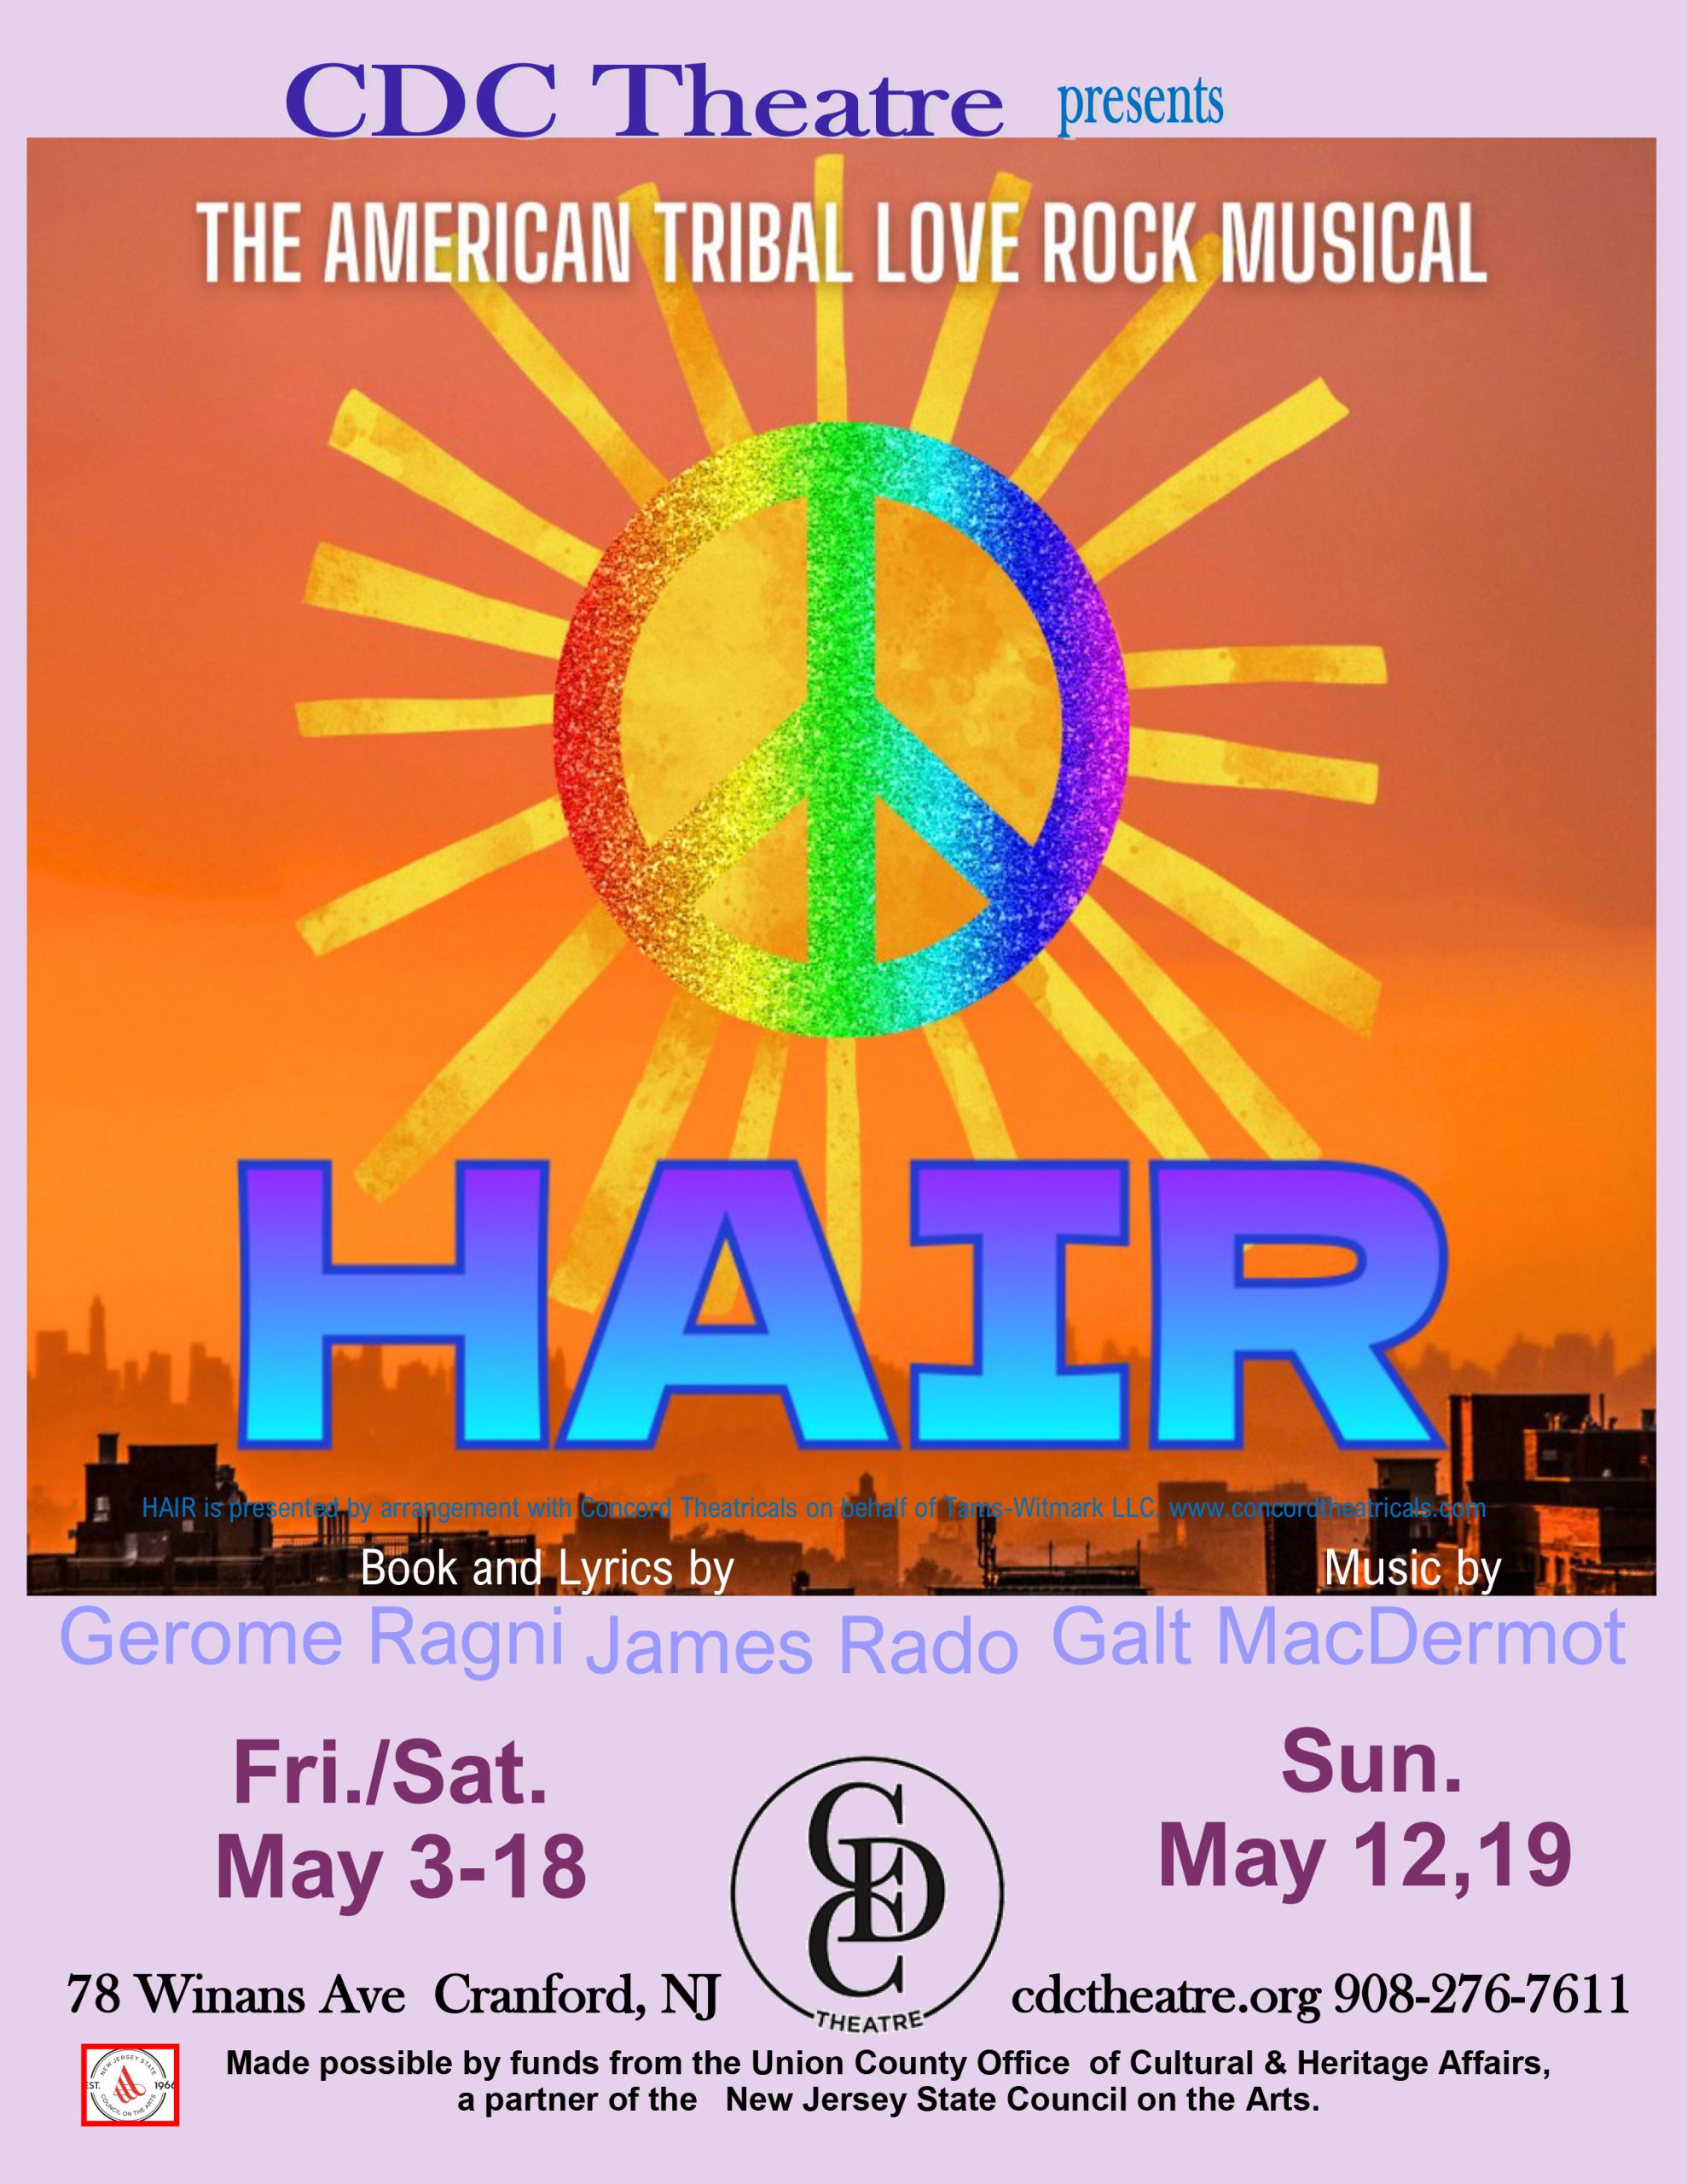 Hair is coming to CDC Theatre in Cranford!